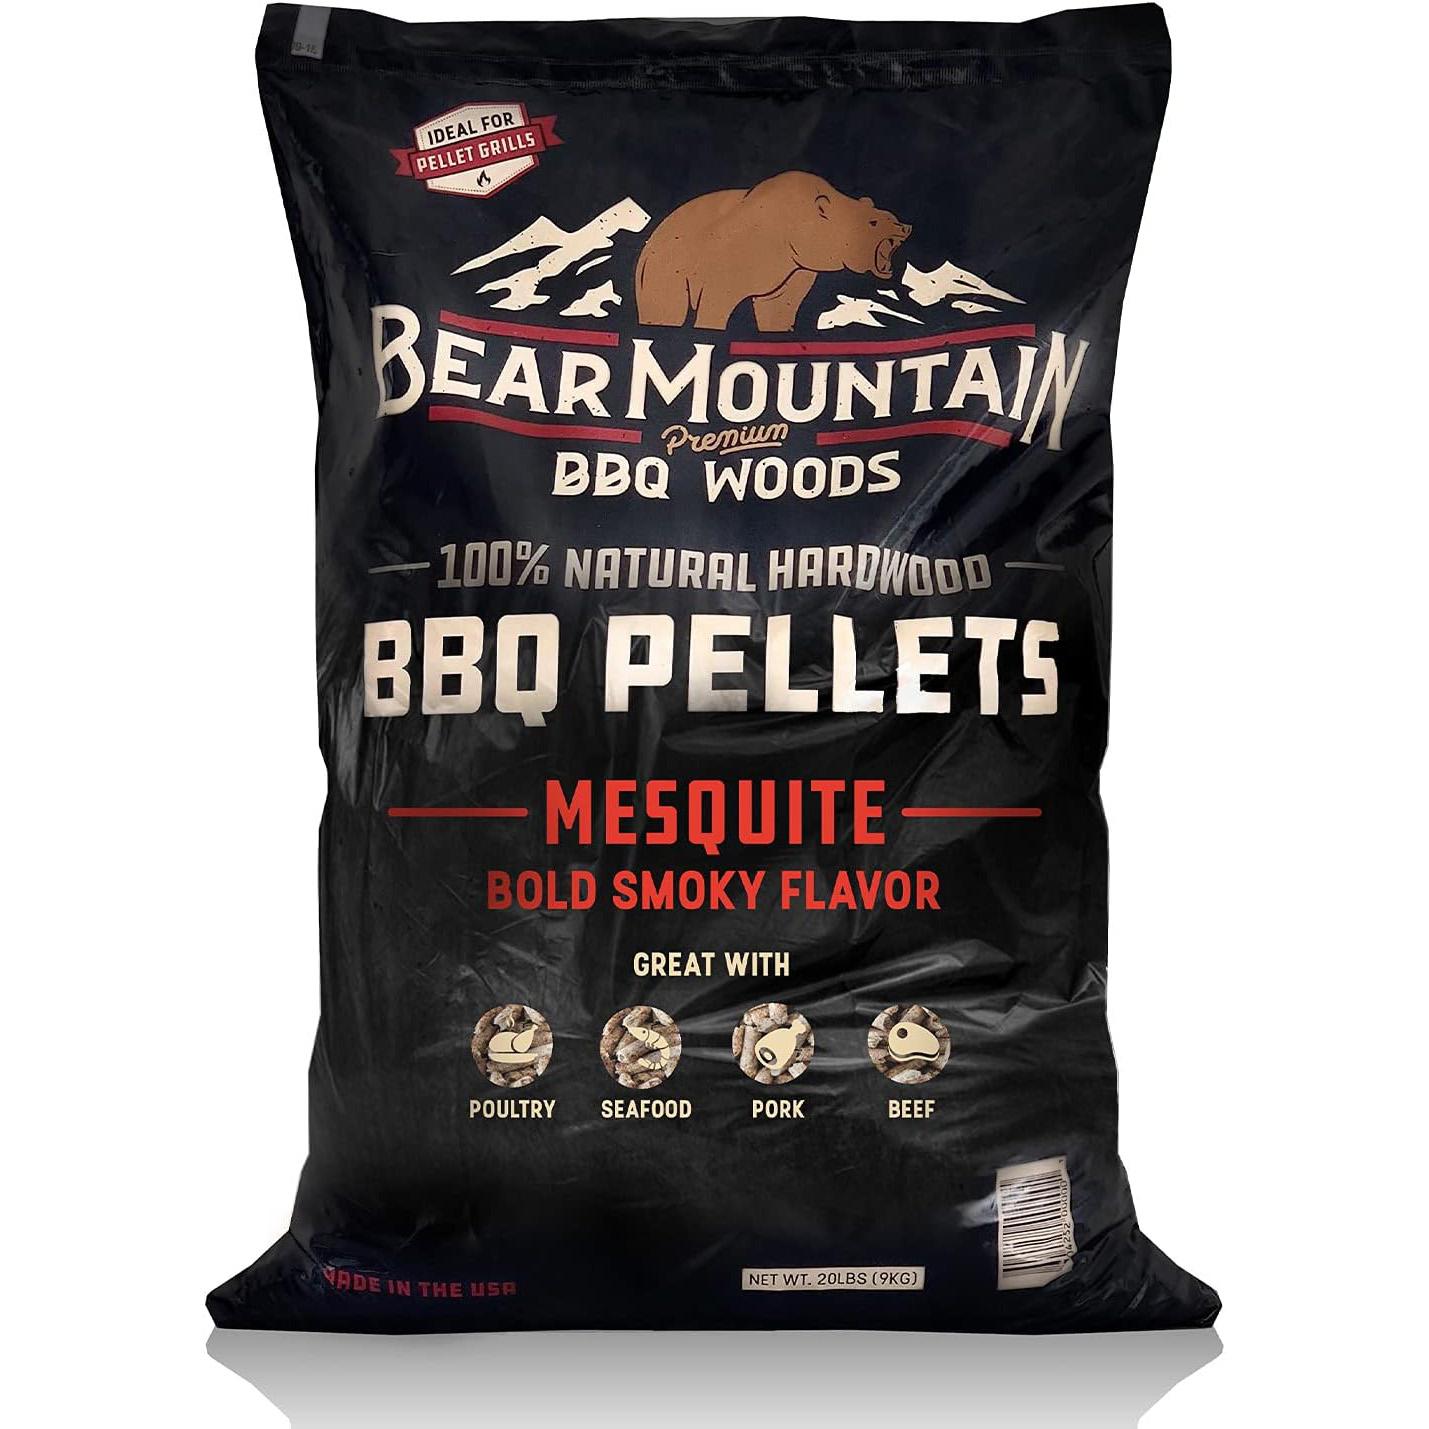 Bear Mountain BBQ Premium All Natural Earthy Wood Chip for $15.99